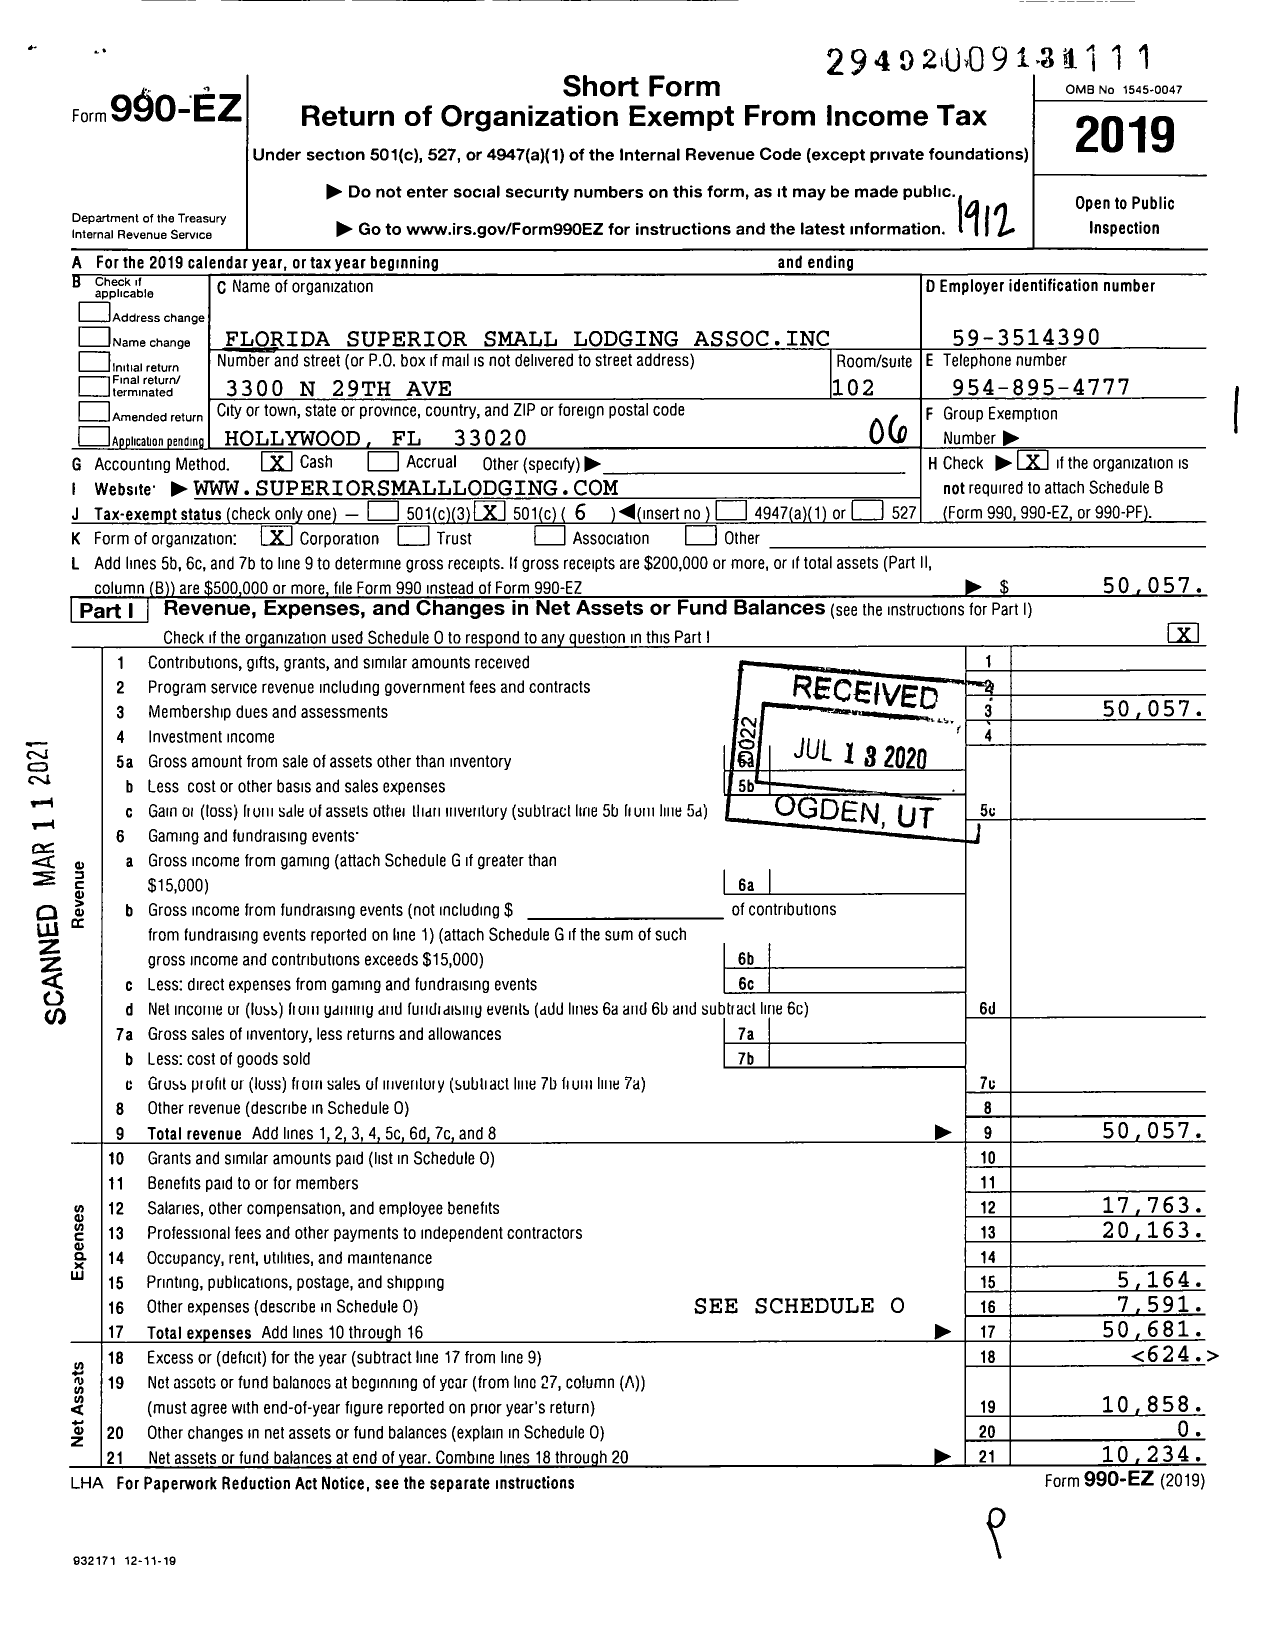 Image of first page of 2019 Form 990EO for Florida Superior Small Lodging Association